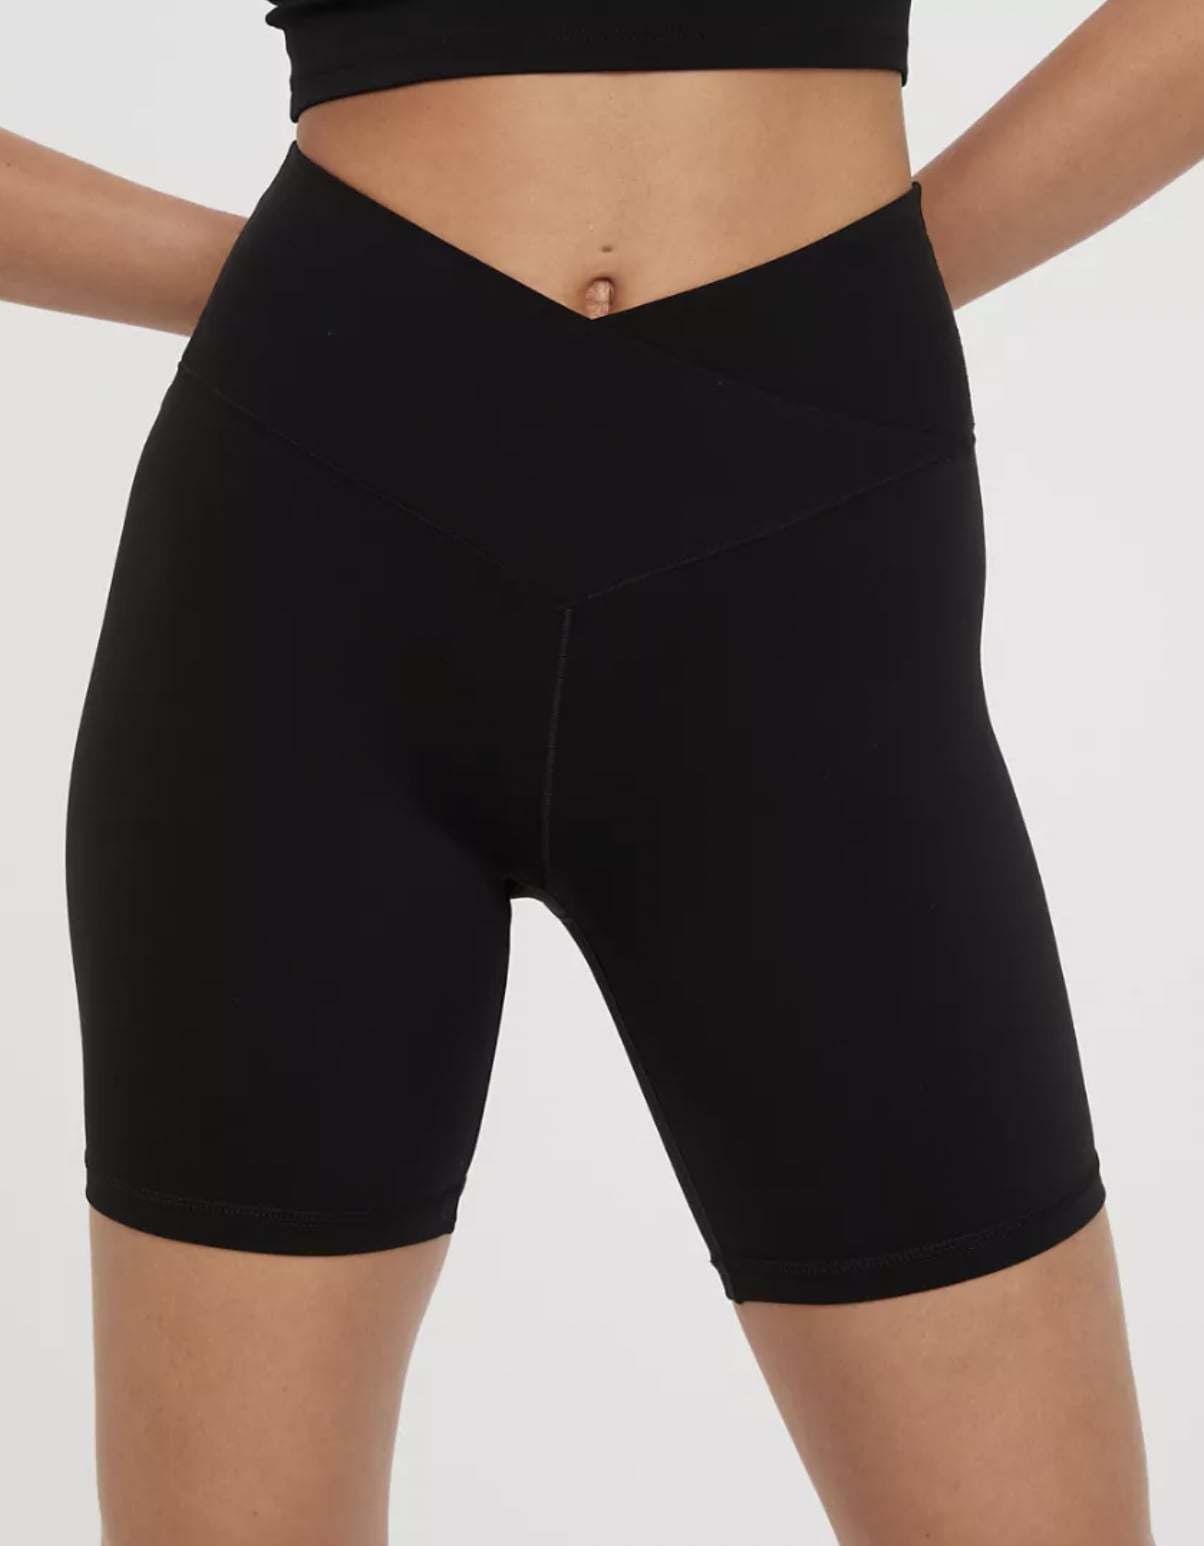 <p><a href="https://ae.com/us/en/p/aerie/bottoms/shorts/offline-real-me-crossover-7-bike-short/6493_4862_073">BUY NOW</a></p><p>$24</p><p><a href="https://ae.com/us/en/p/aerie/bottoms/shorts/offline-real-me-crossover-7-bike-short/6493_4862_073" class="ga-track"><strong>Aerie Offline Real Me Crossover 7" Bike Shorts</strong></a> ($24, originally $35) </p> <p>No two bike shorts are made the same, and this style is especially unique because it feature the stylish crossover waistband that's been dominating the activewear scene recently. Crafted from a lightweight fabric, the activewear bottoms boast a V-seam silhouette that's designed to hug your waist in all the best ways.</p>